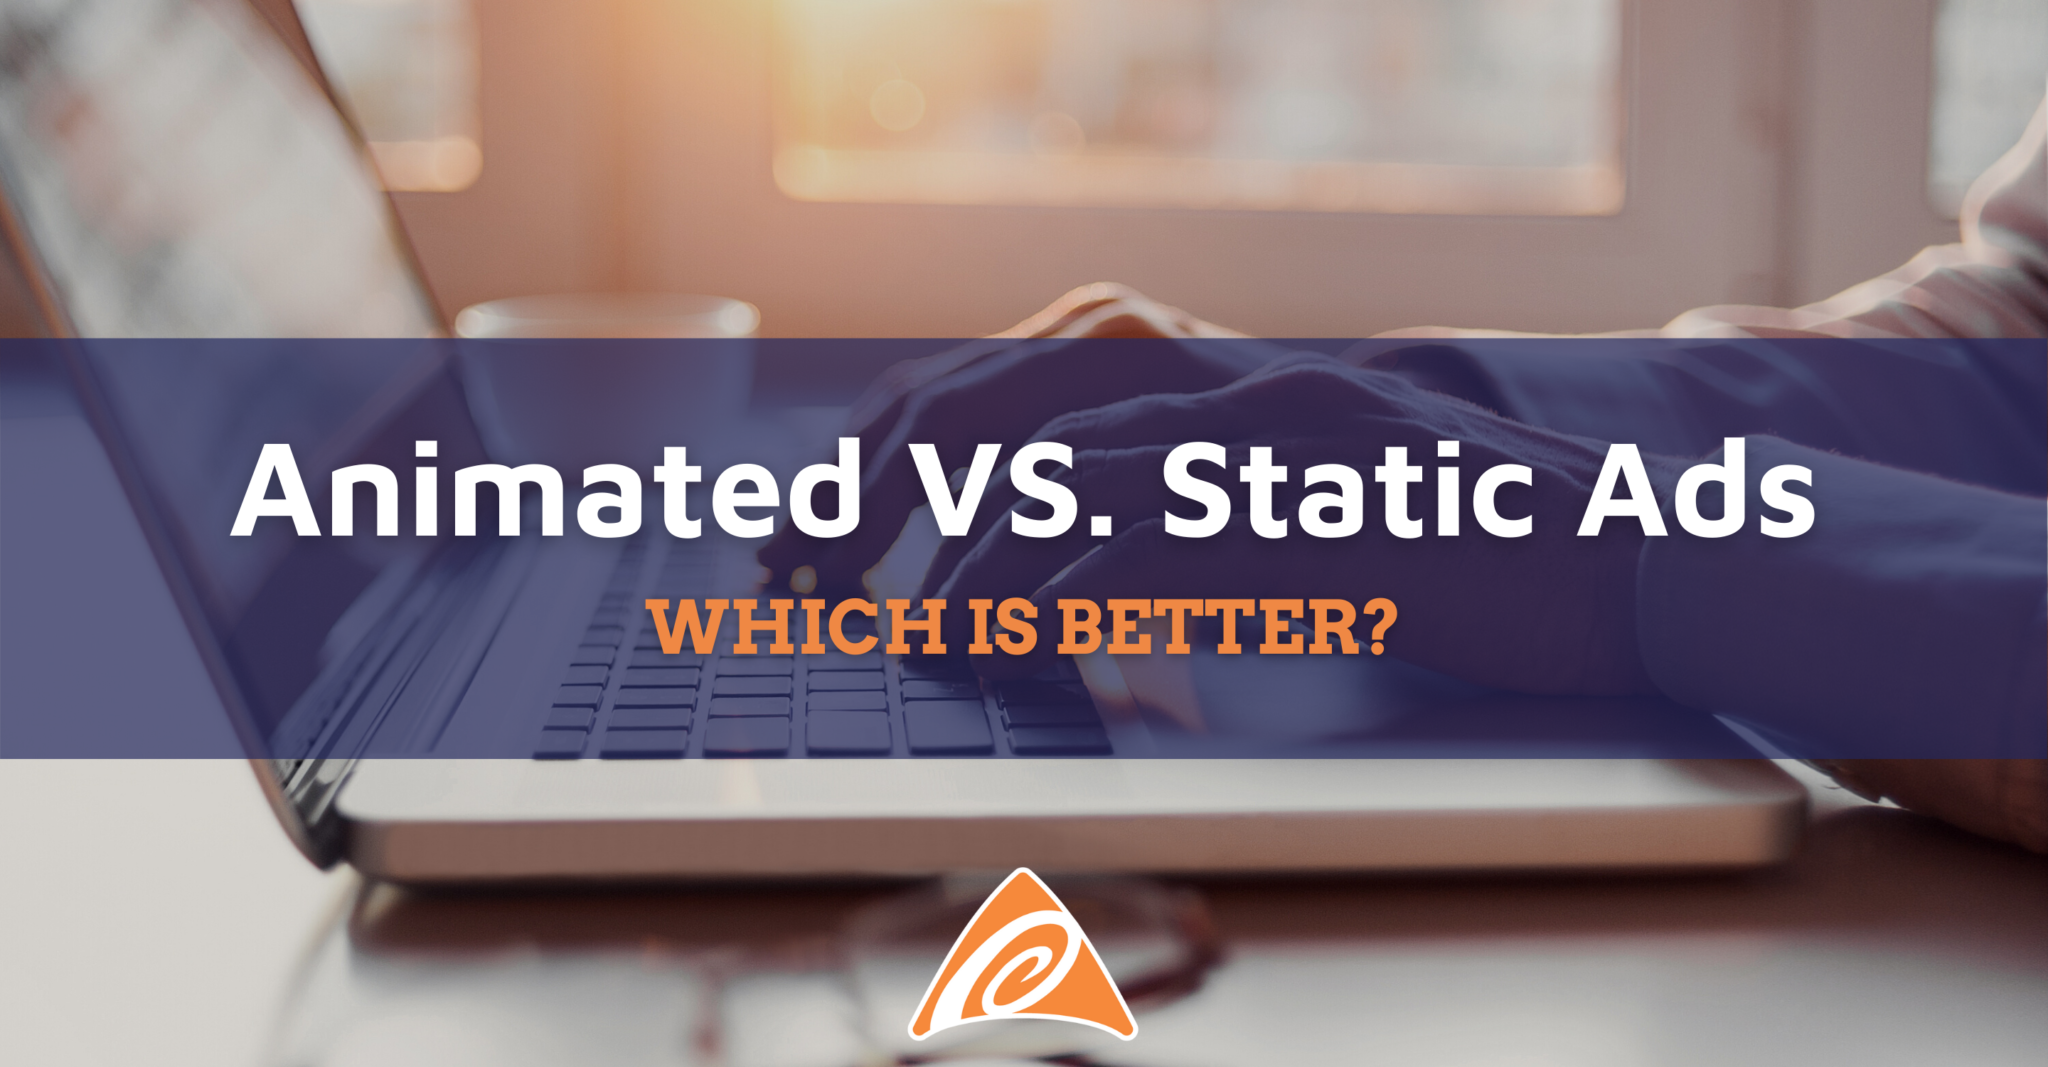 Image of hands typing on a laptop with decorative text saying, "Animated VS Static Ads: Which is better?"